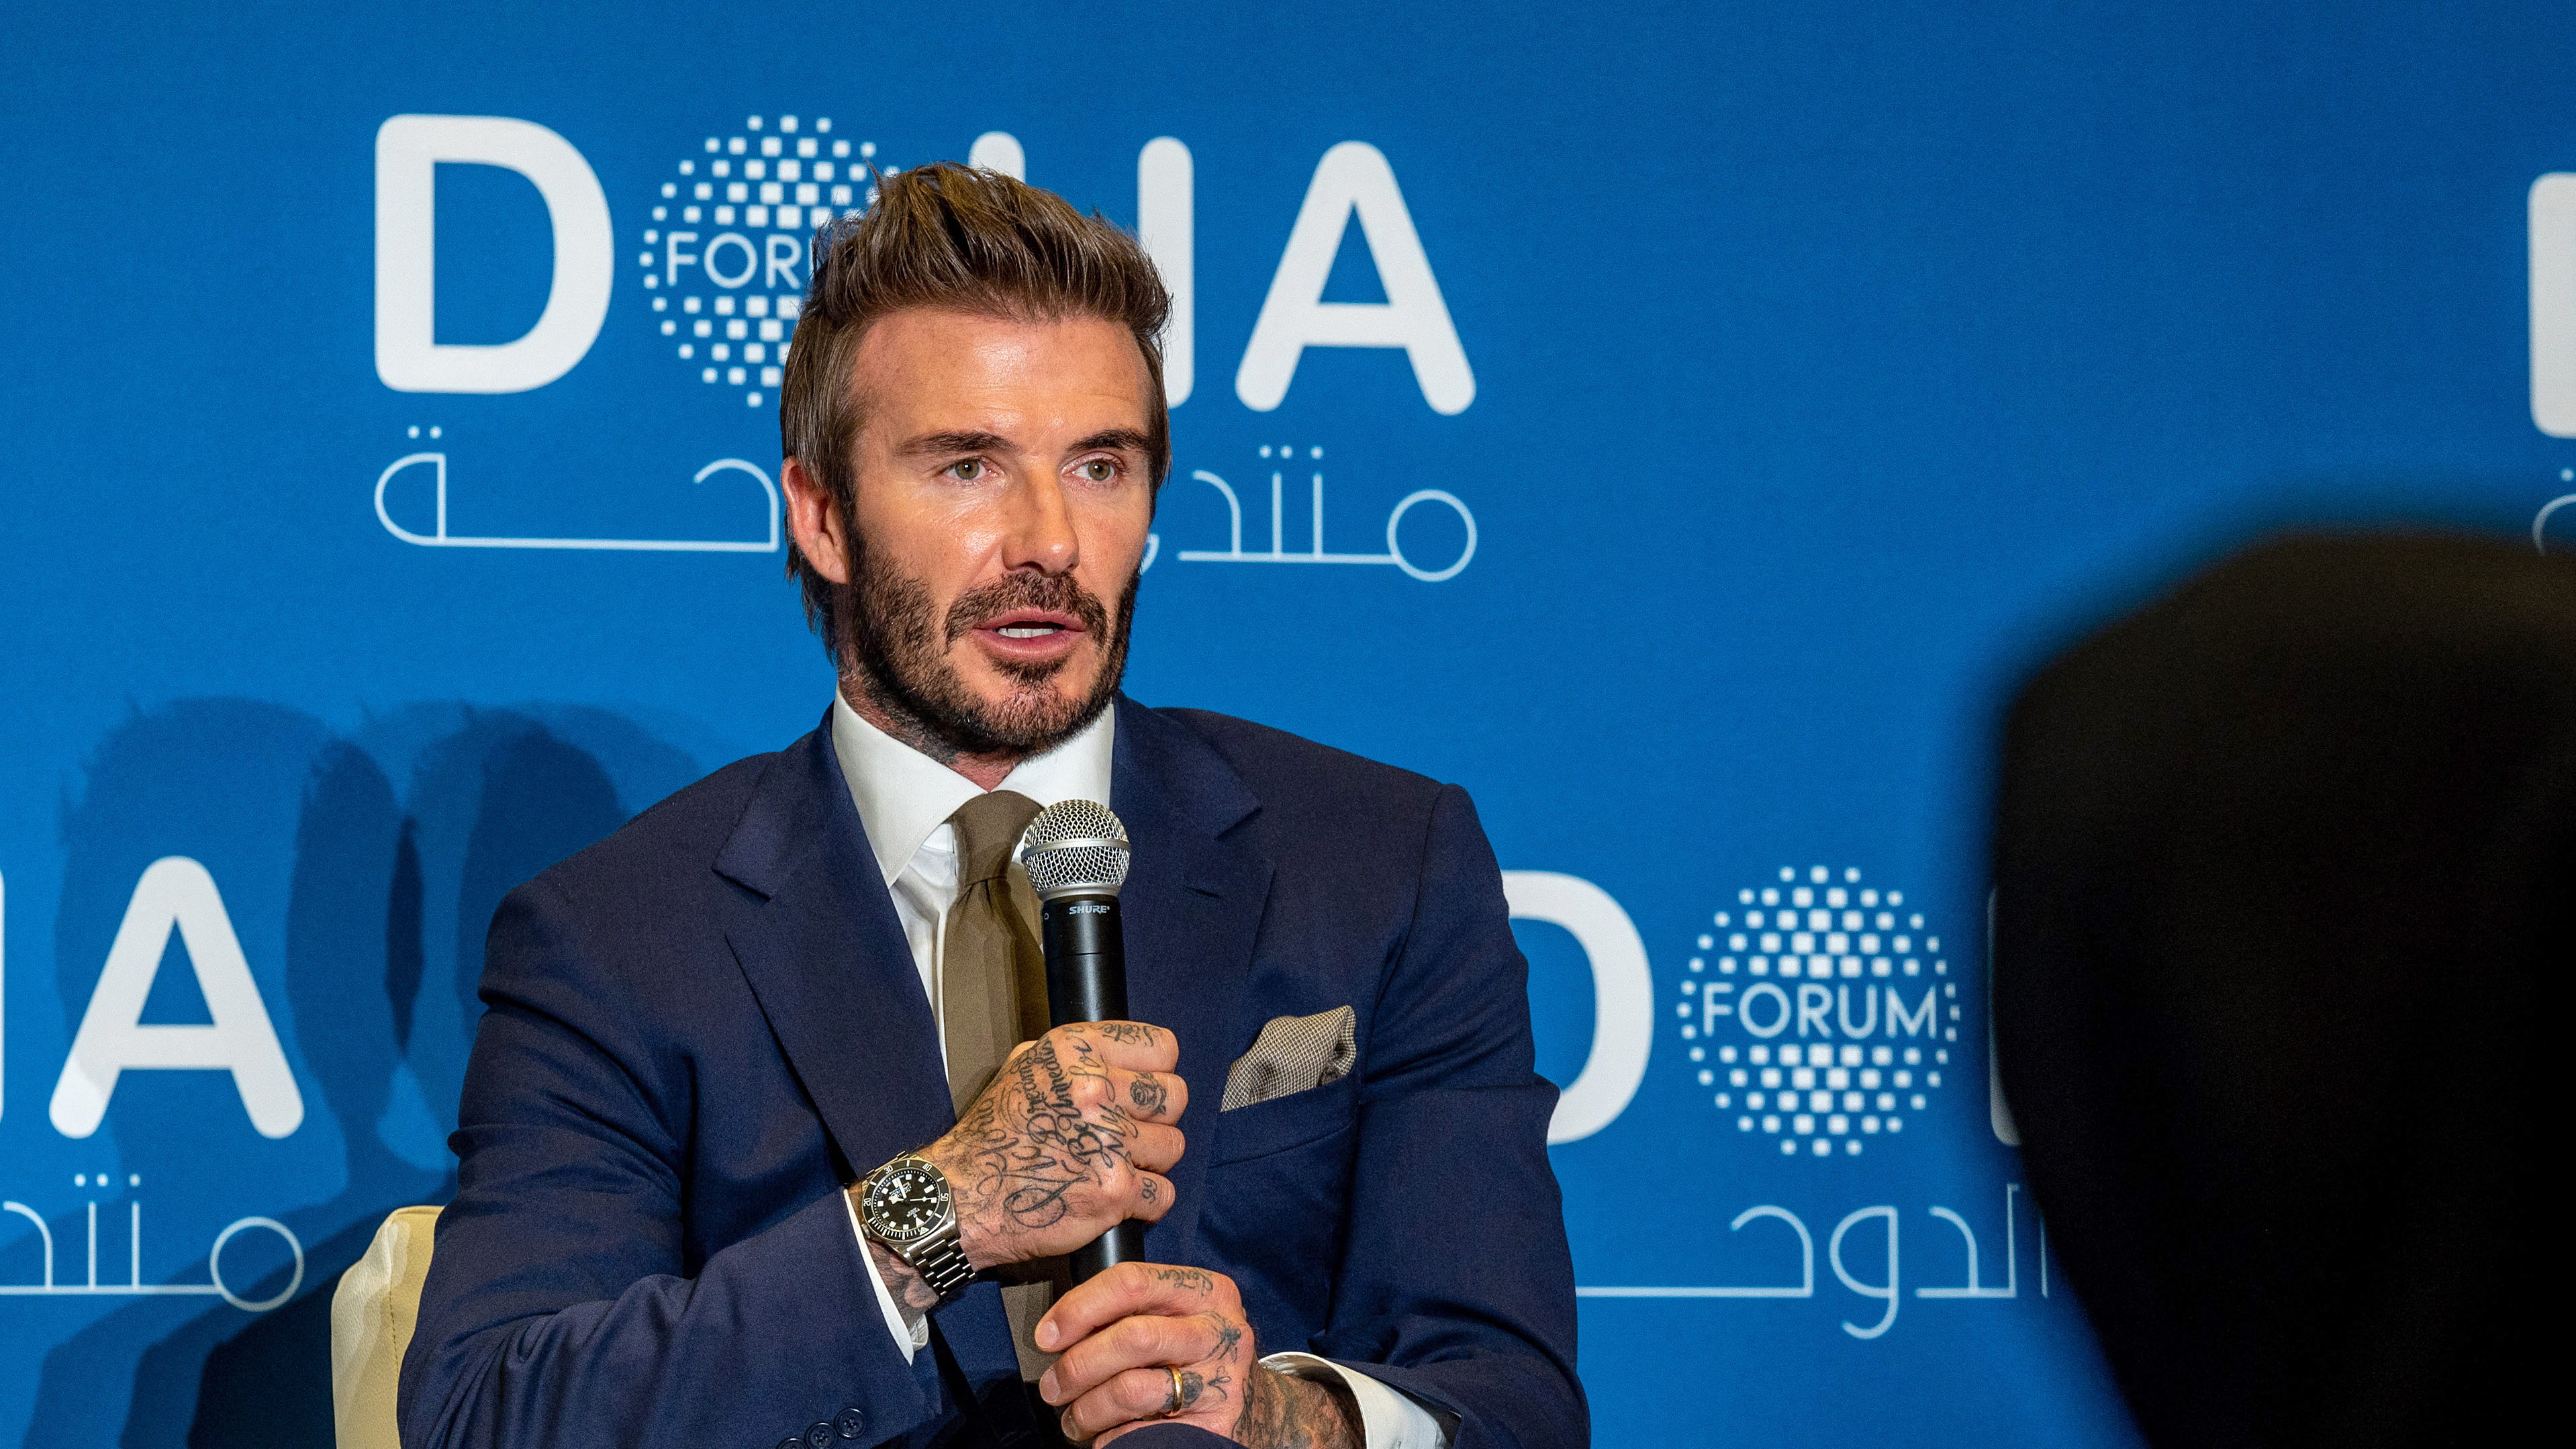 Review of the Qatar World Cup in Great Britain – Washing the game with Beckham and Robbie Williams